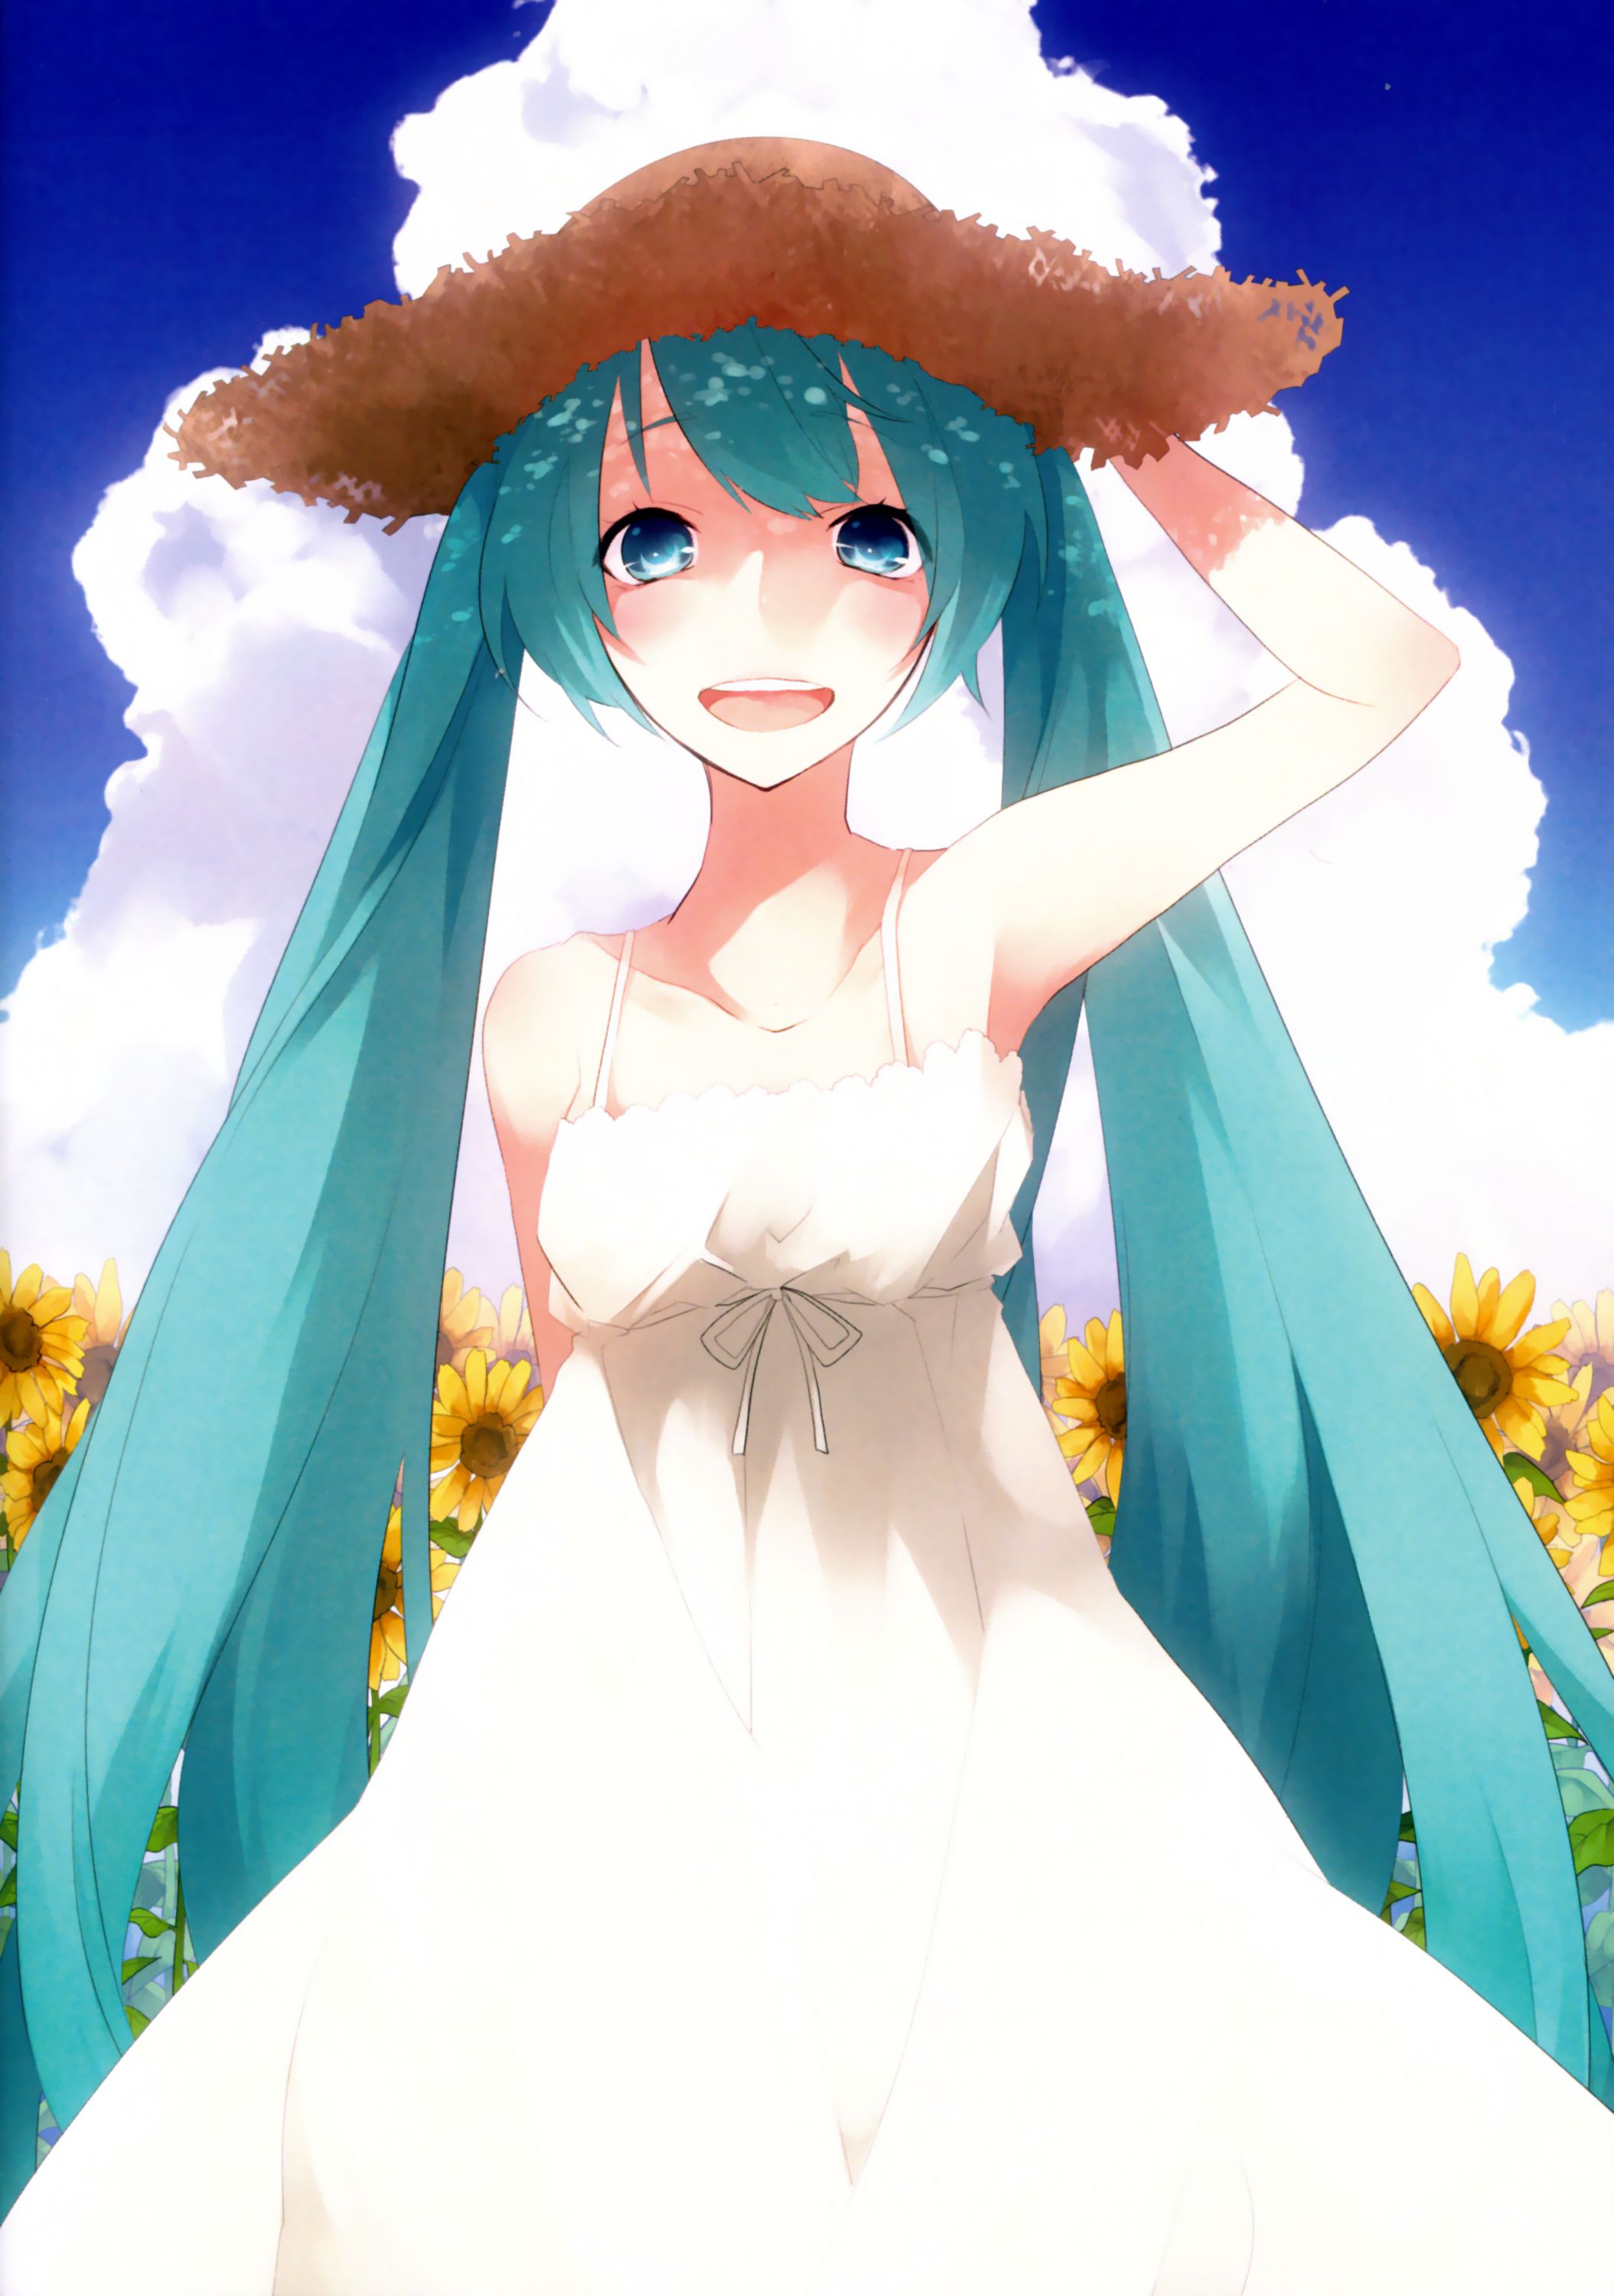 Assorted Miku images after a long absence. 38